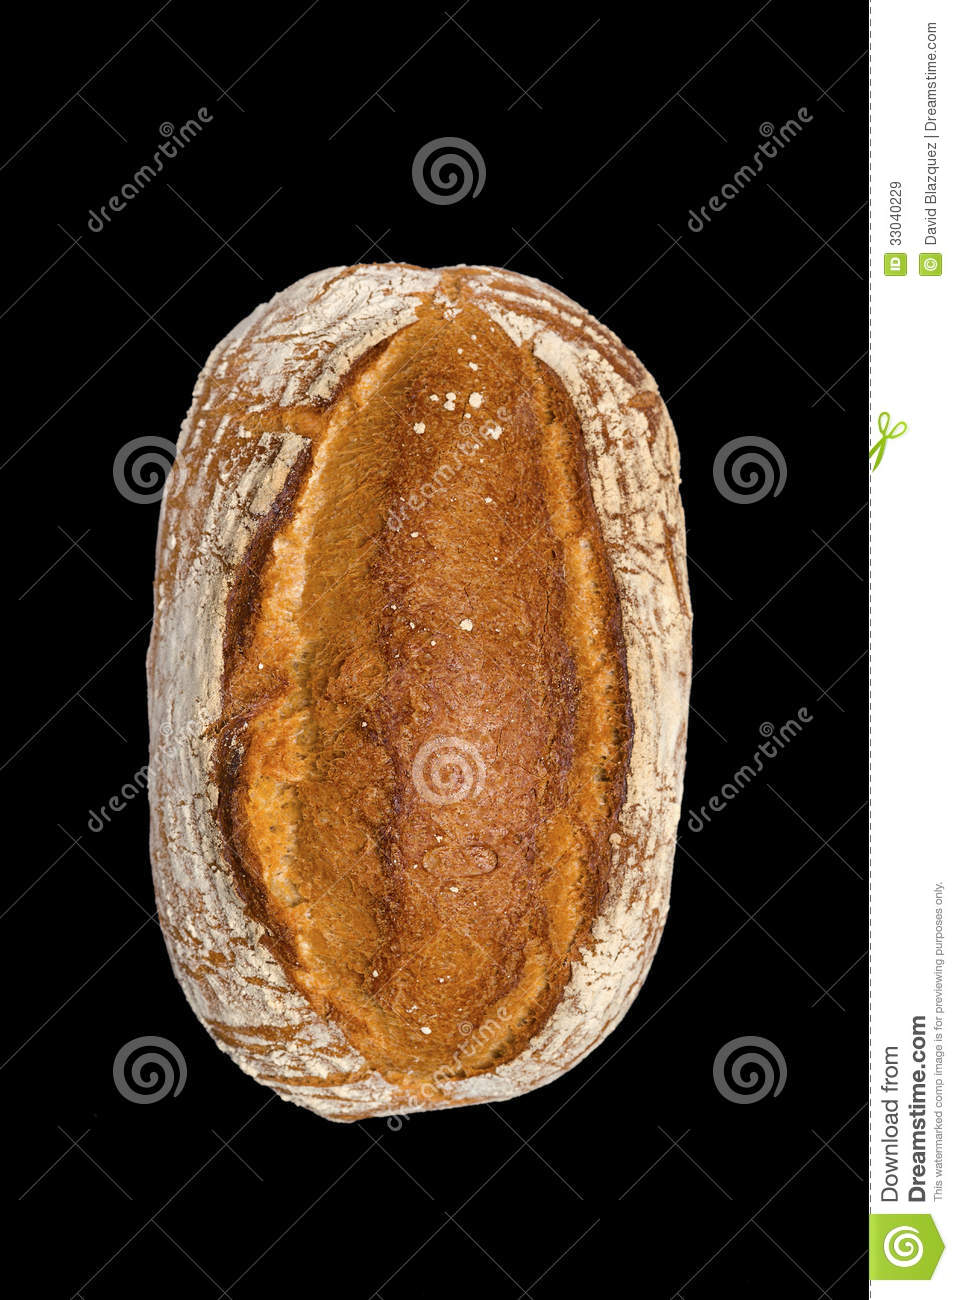 Artisan Bread Royalty Free Stock Images   Image  33040229